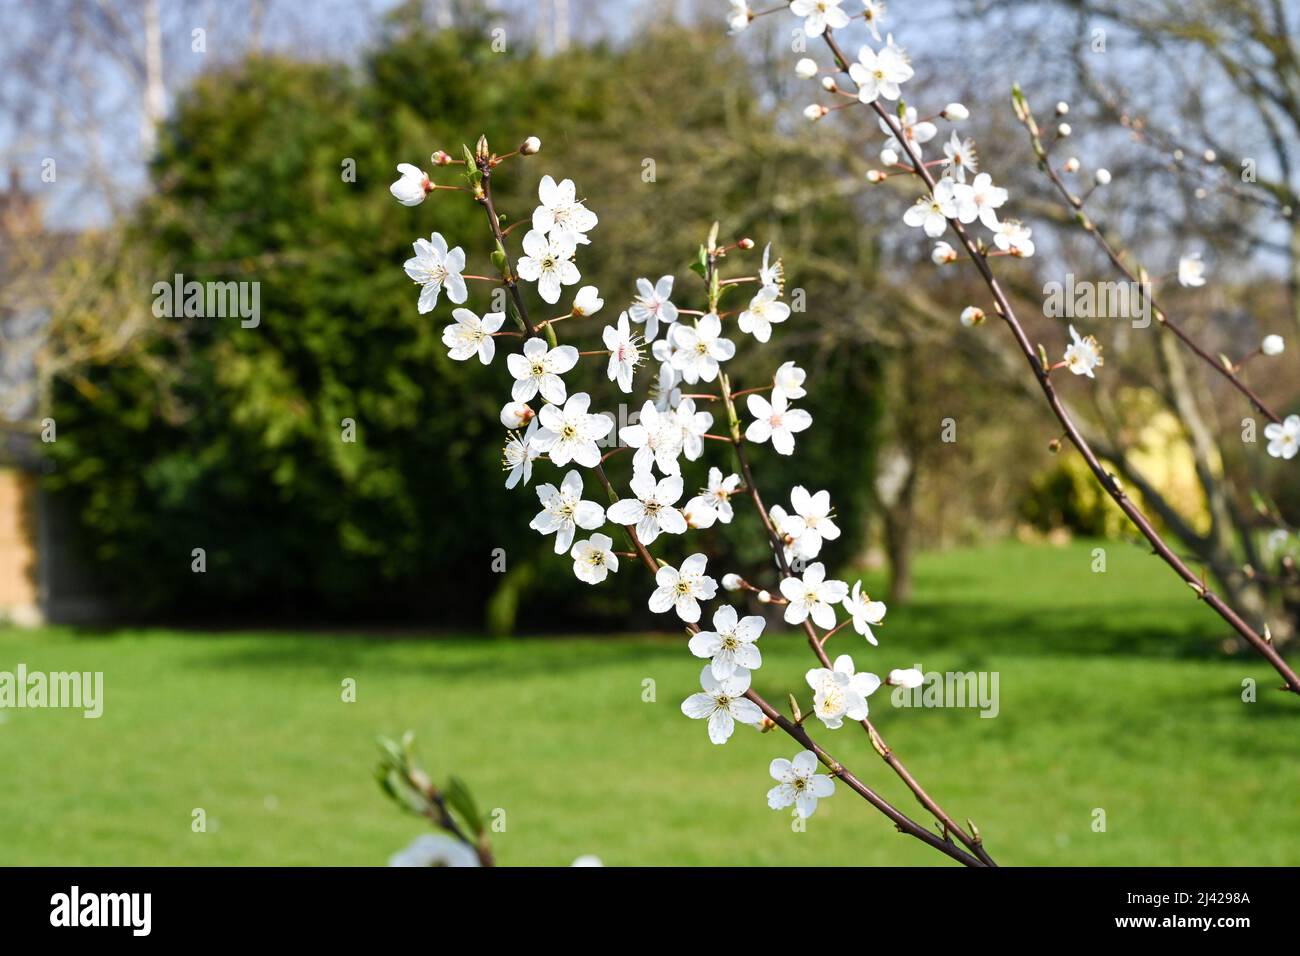 Plum tree blossom, Prunus subg, meihus, bright white flowers in a English country garden, on a spring morning Stock Photo